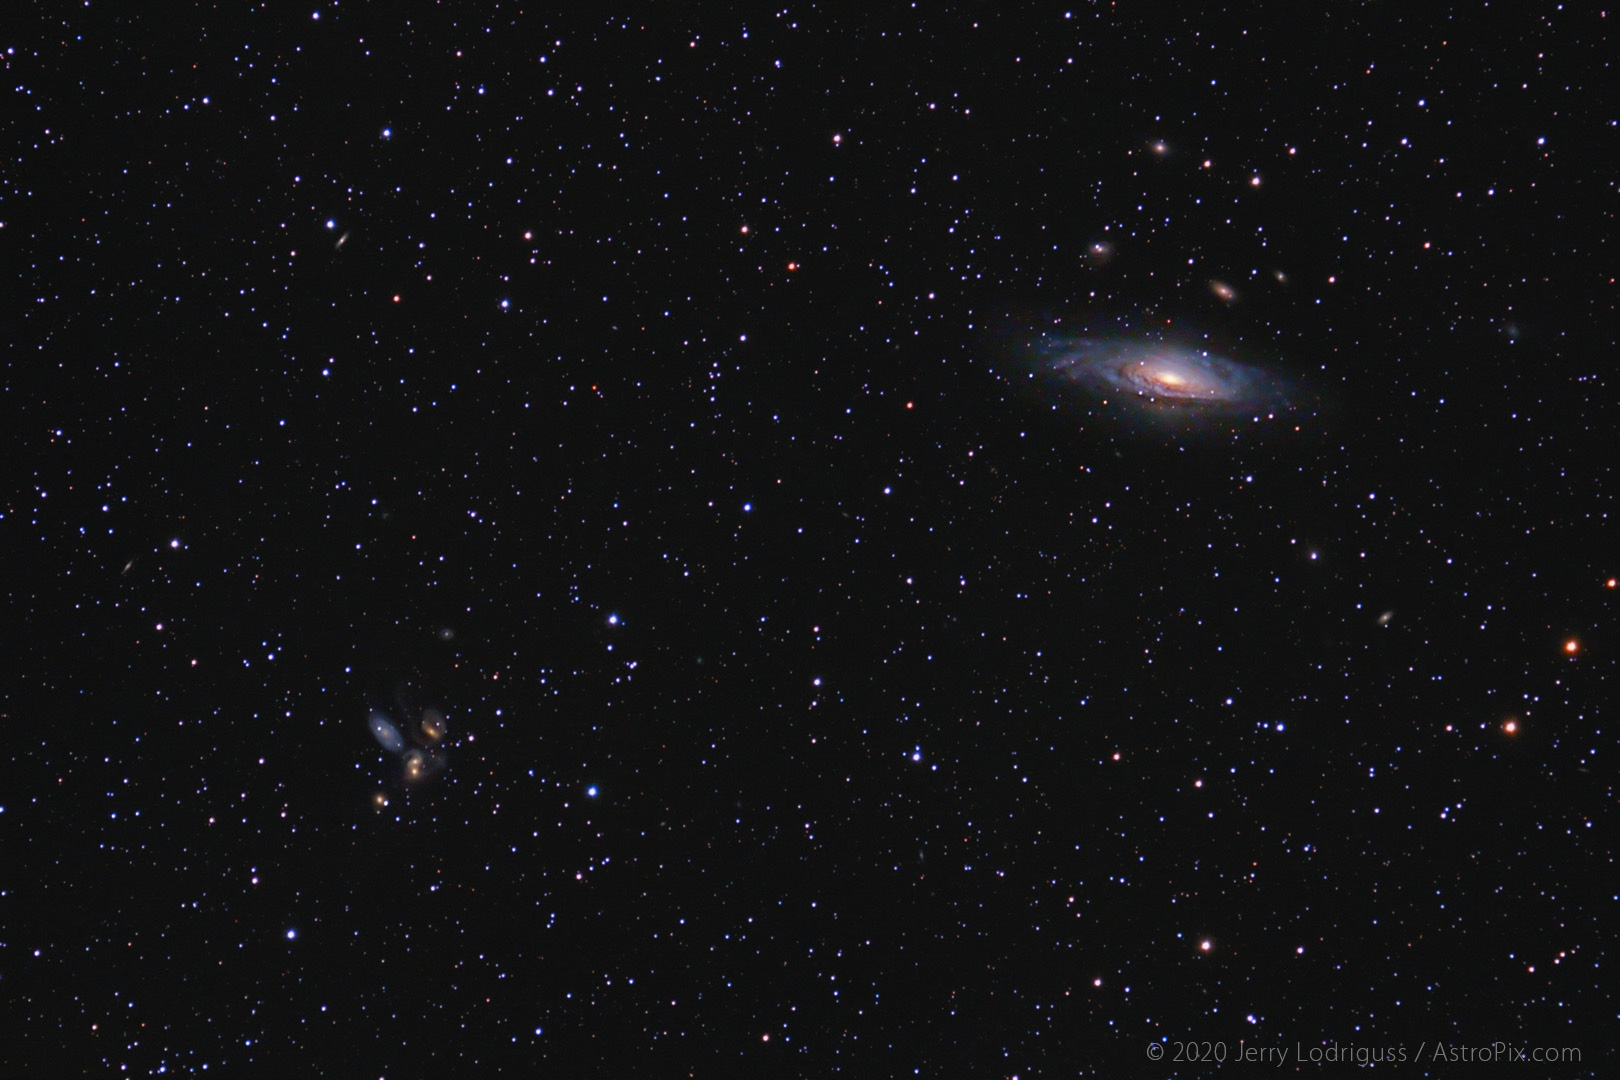 NGC 7331 is the large spiral galaxy at upper right, and Stephan's Quintet is a compact galaxy group at lower left.